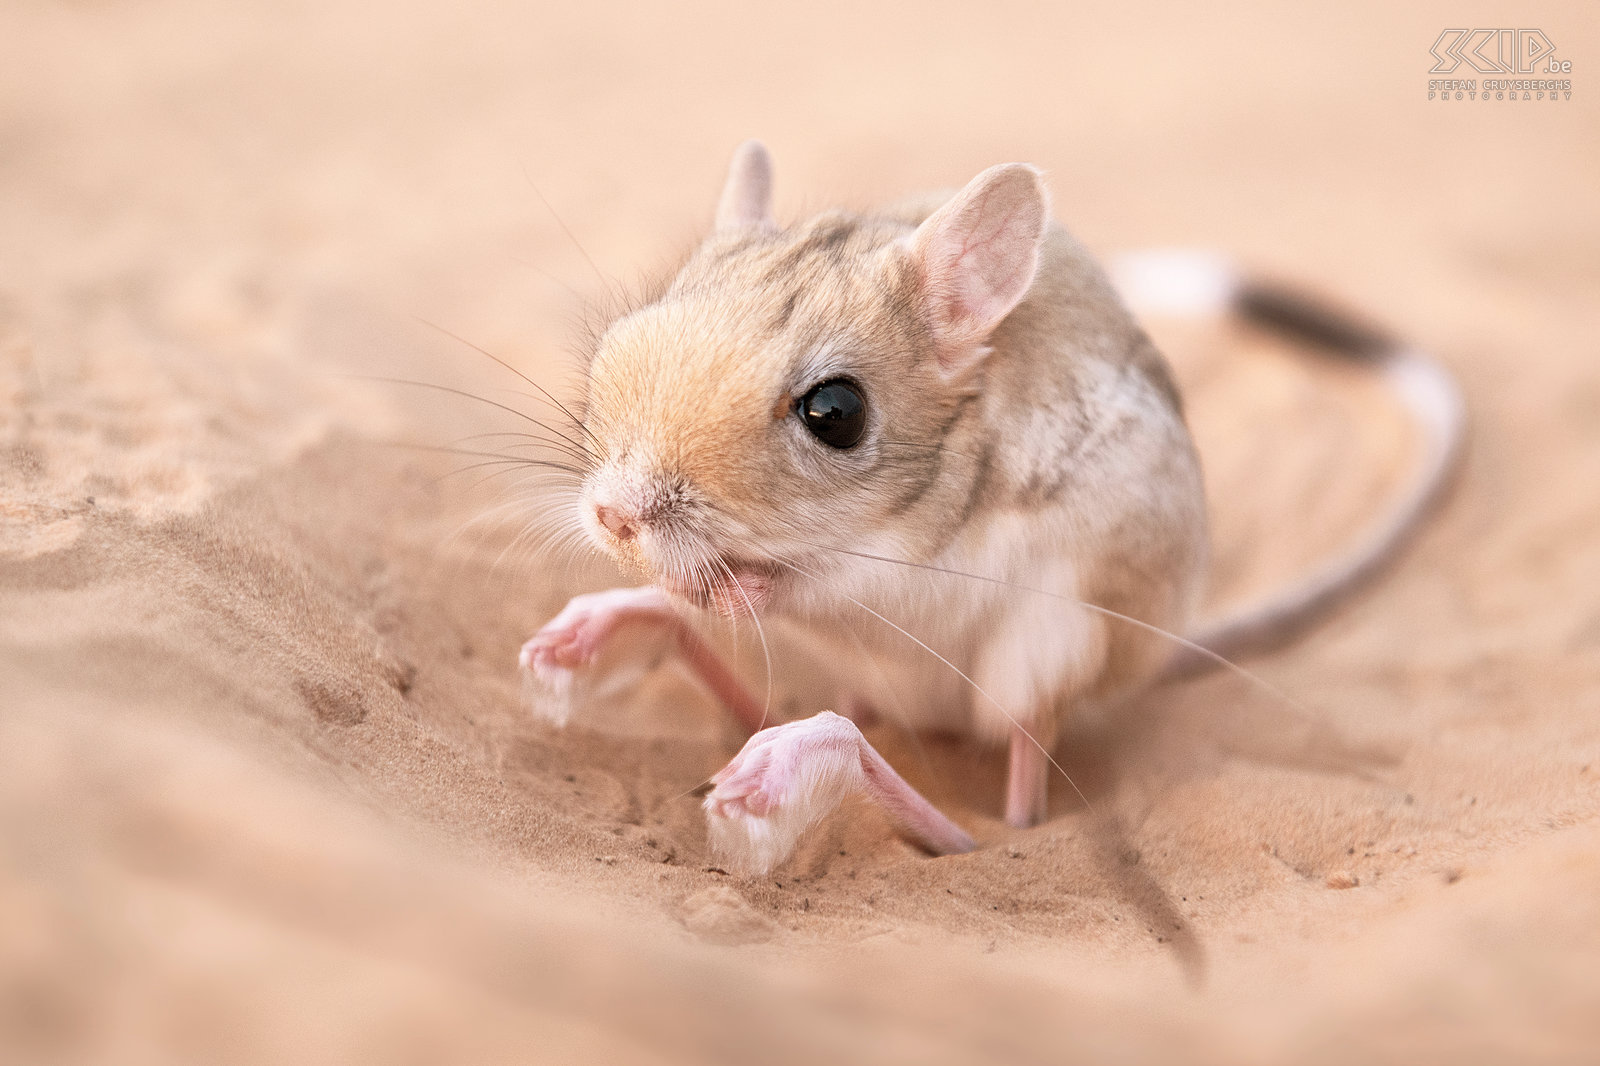 Jerboa This special creature is a Jerboa (Dipodidae). It is hopping desert rodent which looks like a small kangaroo can be found throughout Northern Africa. Stefan Cruysberghs